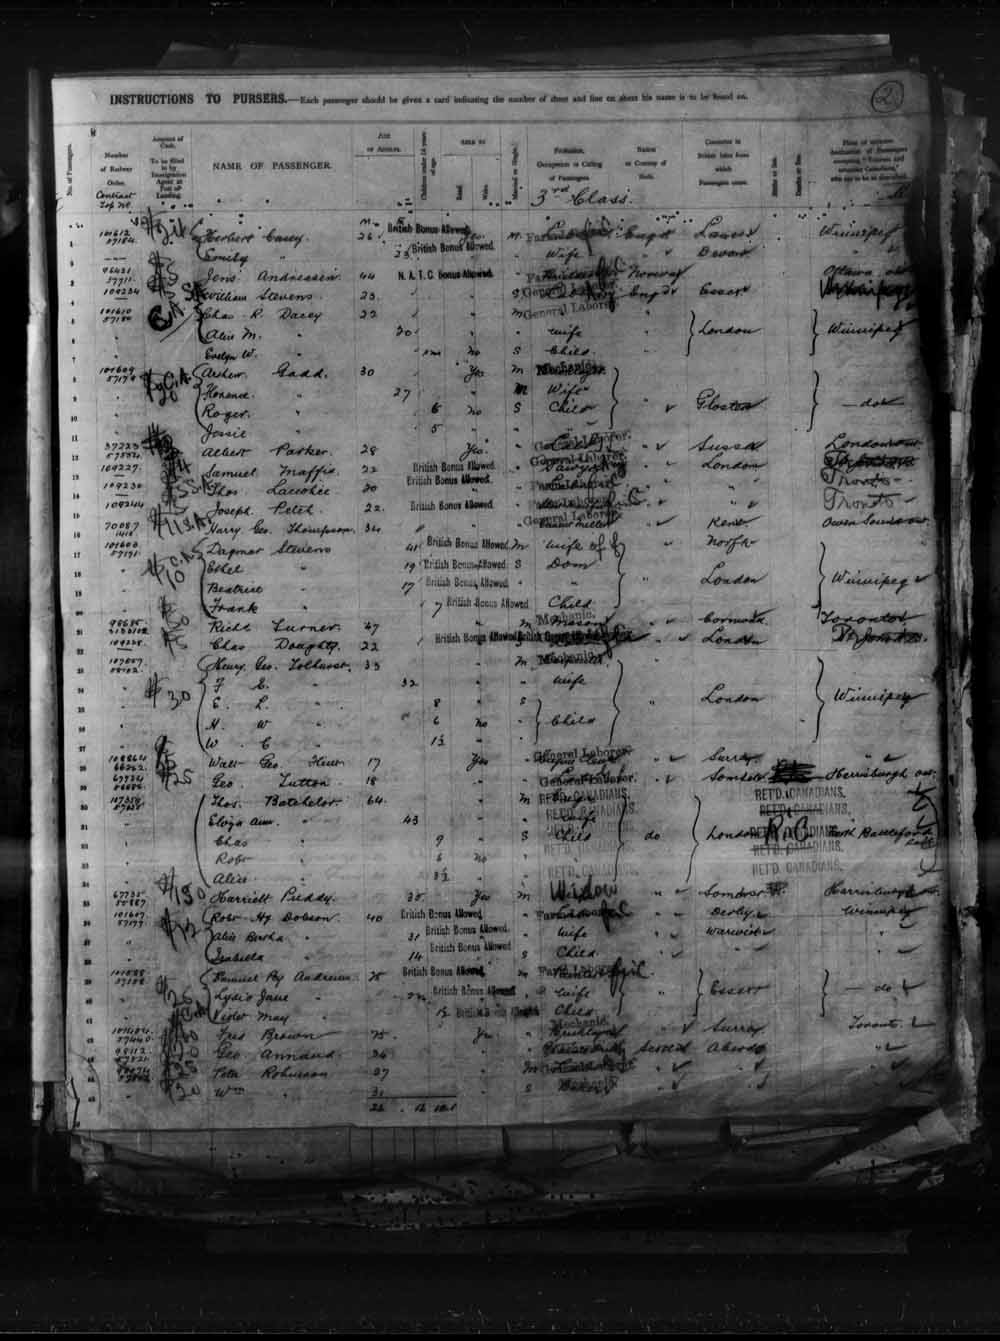 Digitized page of Quebec Passenger Lists for Image No.: e003649437